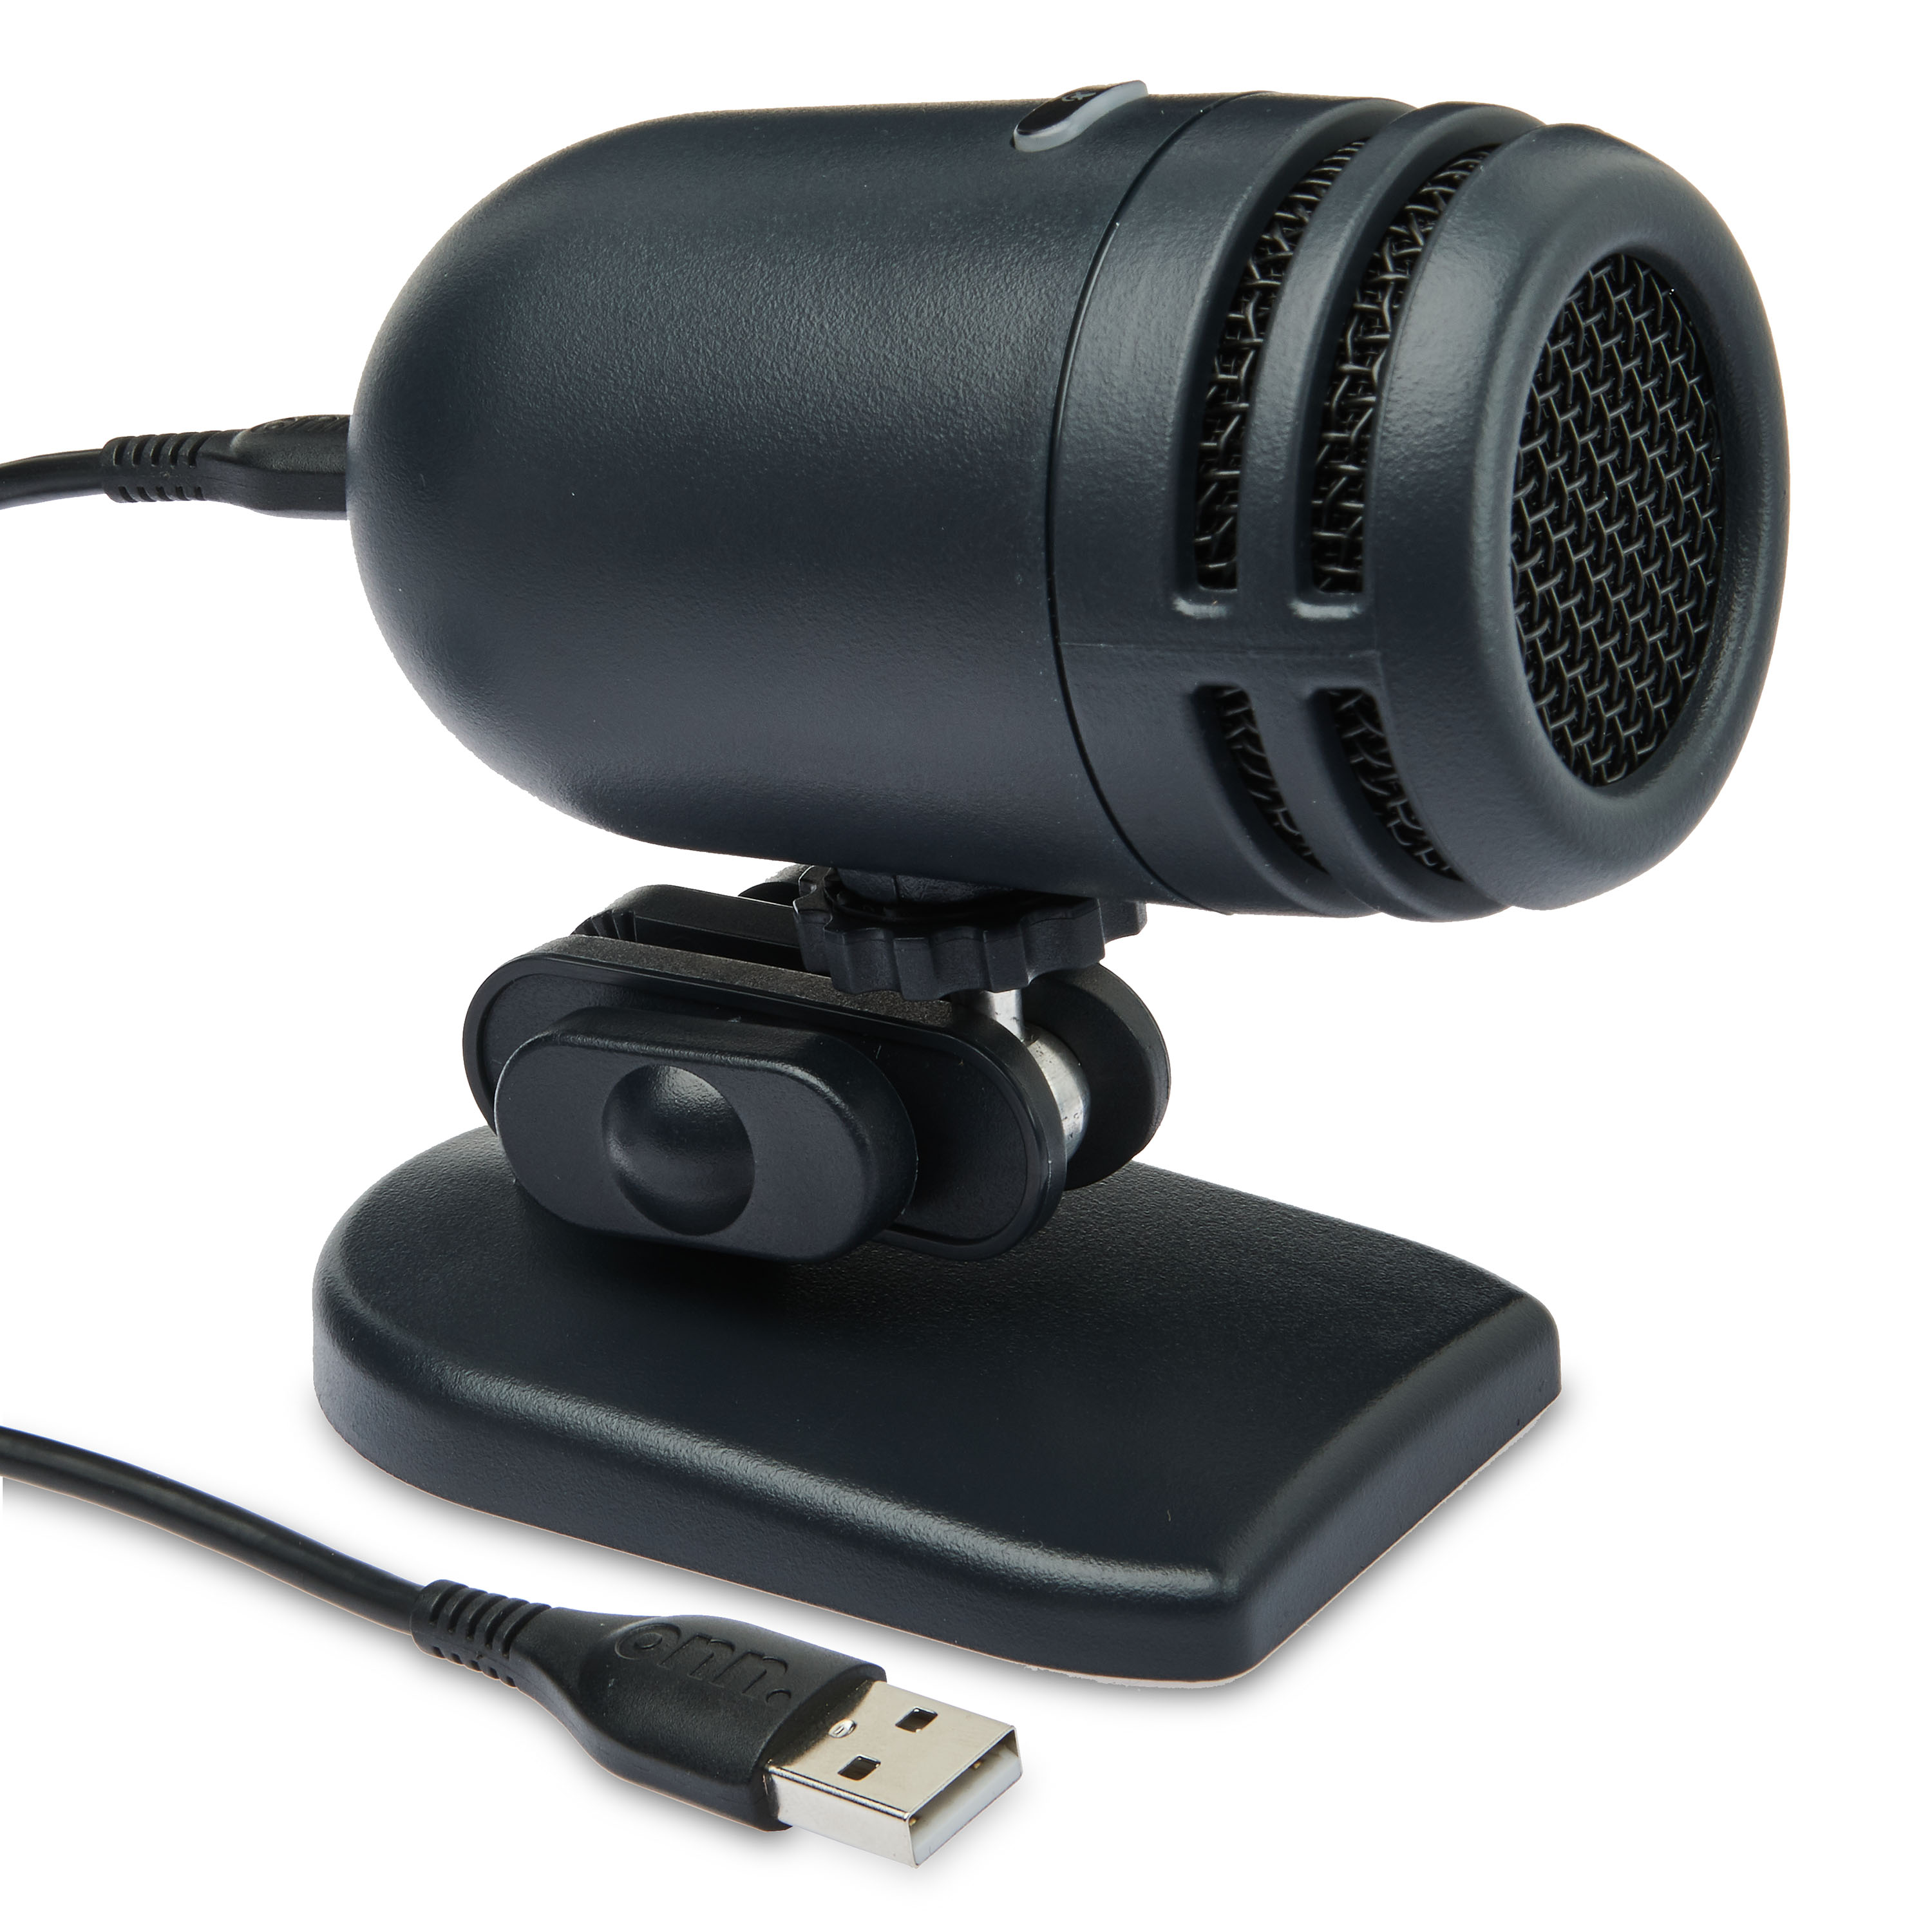 onn. USB Podcast Microphone with Cardioid Recording Pattern - image 2 of 9